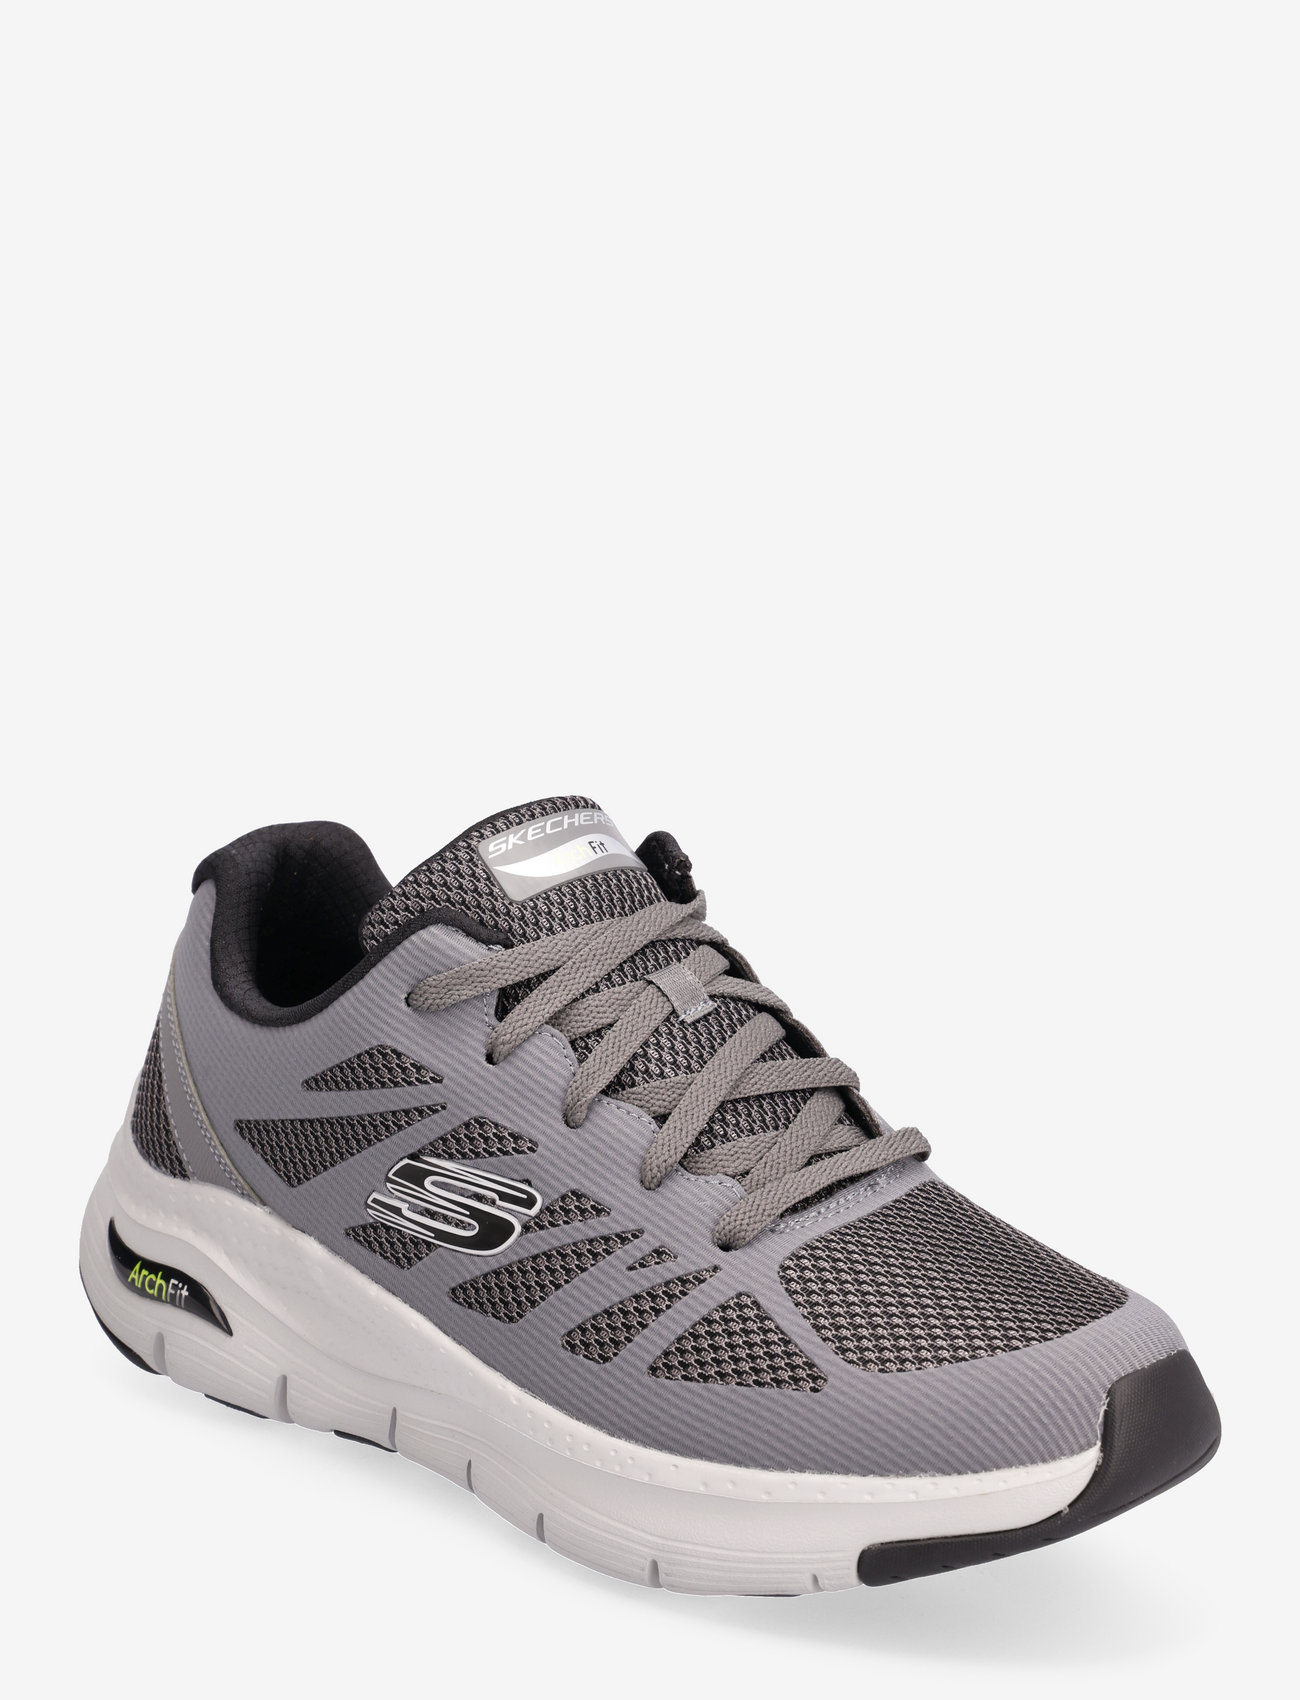 Skechers - Mens Arch Fit - Charge Back - niedriger schnitt - ccbk charcoal black - 0